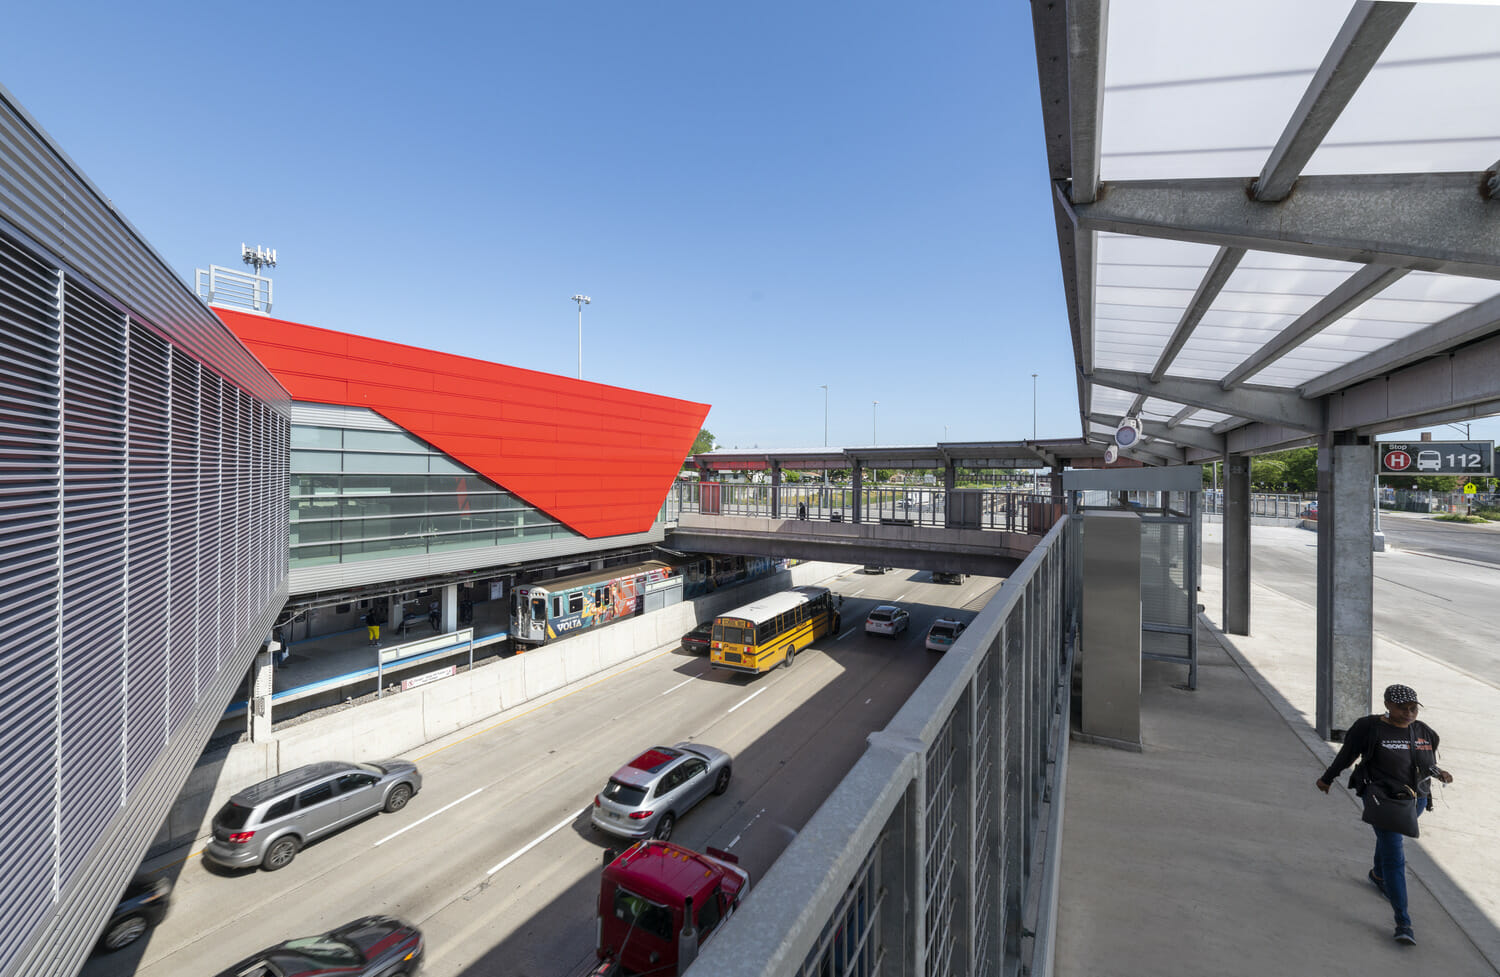 An aerial view of a bus station with a red roof.